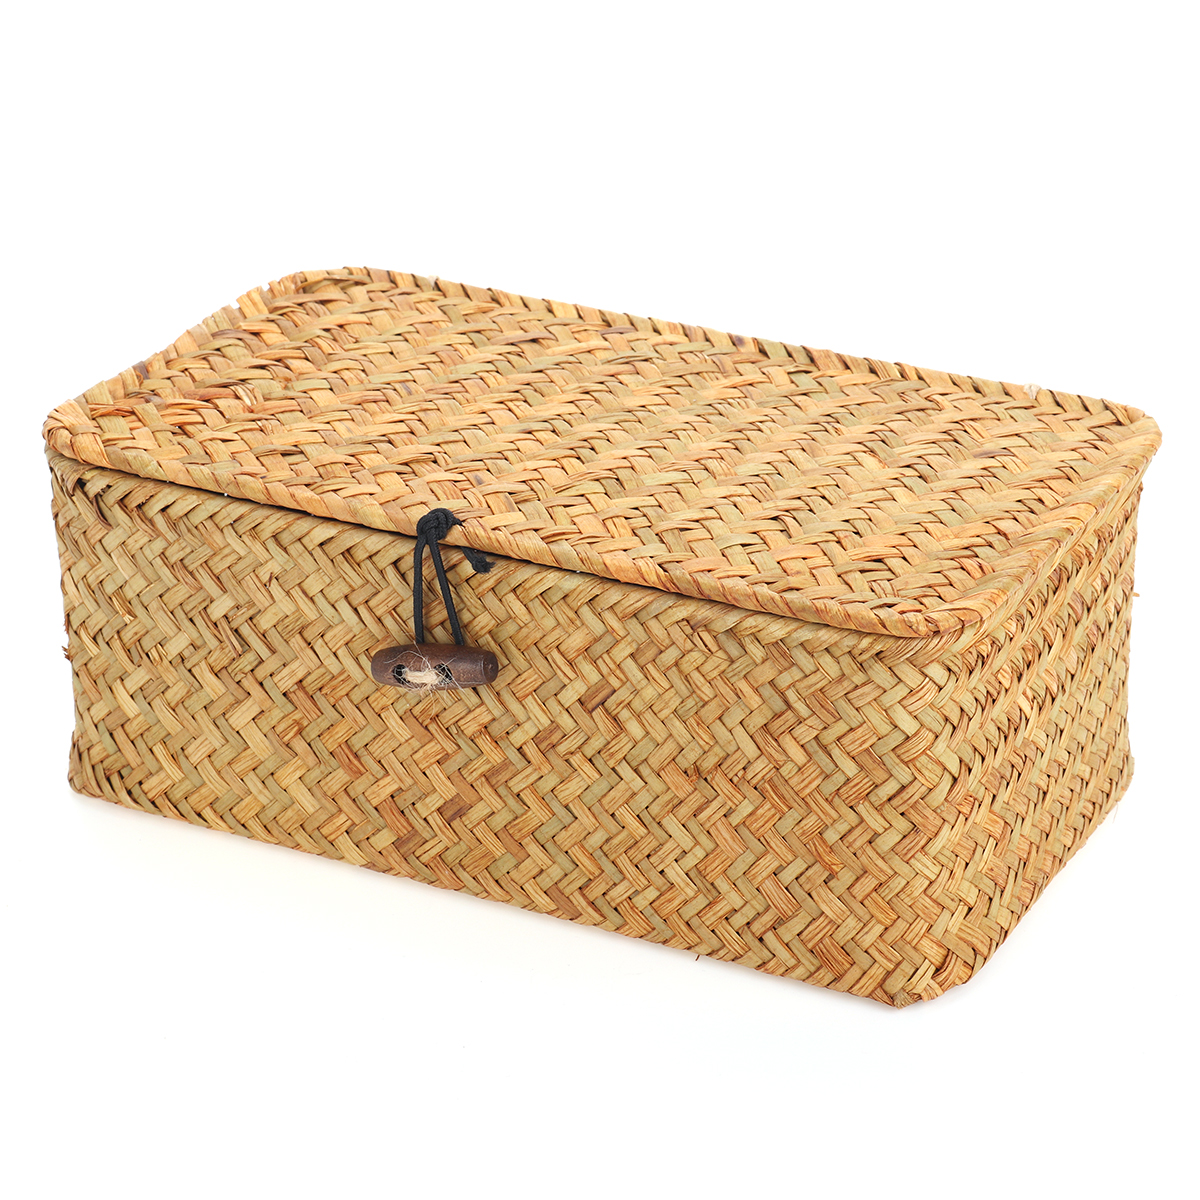 Storage-Box-Rectangular-Straw-Flower-Basket-with-Cover-Home-Garden-Fruit-Clothes-1748147-4